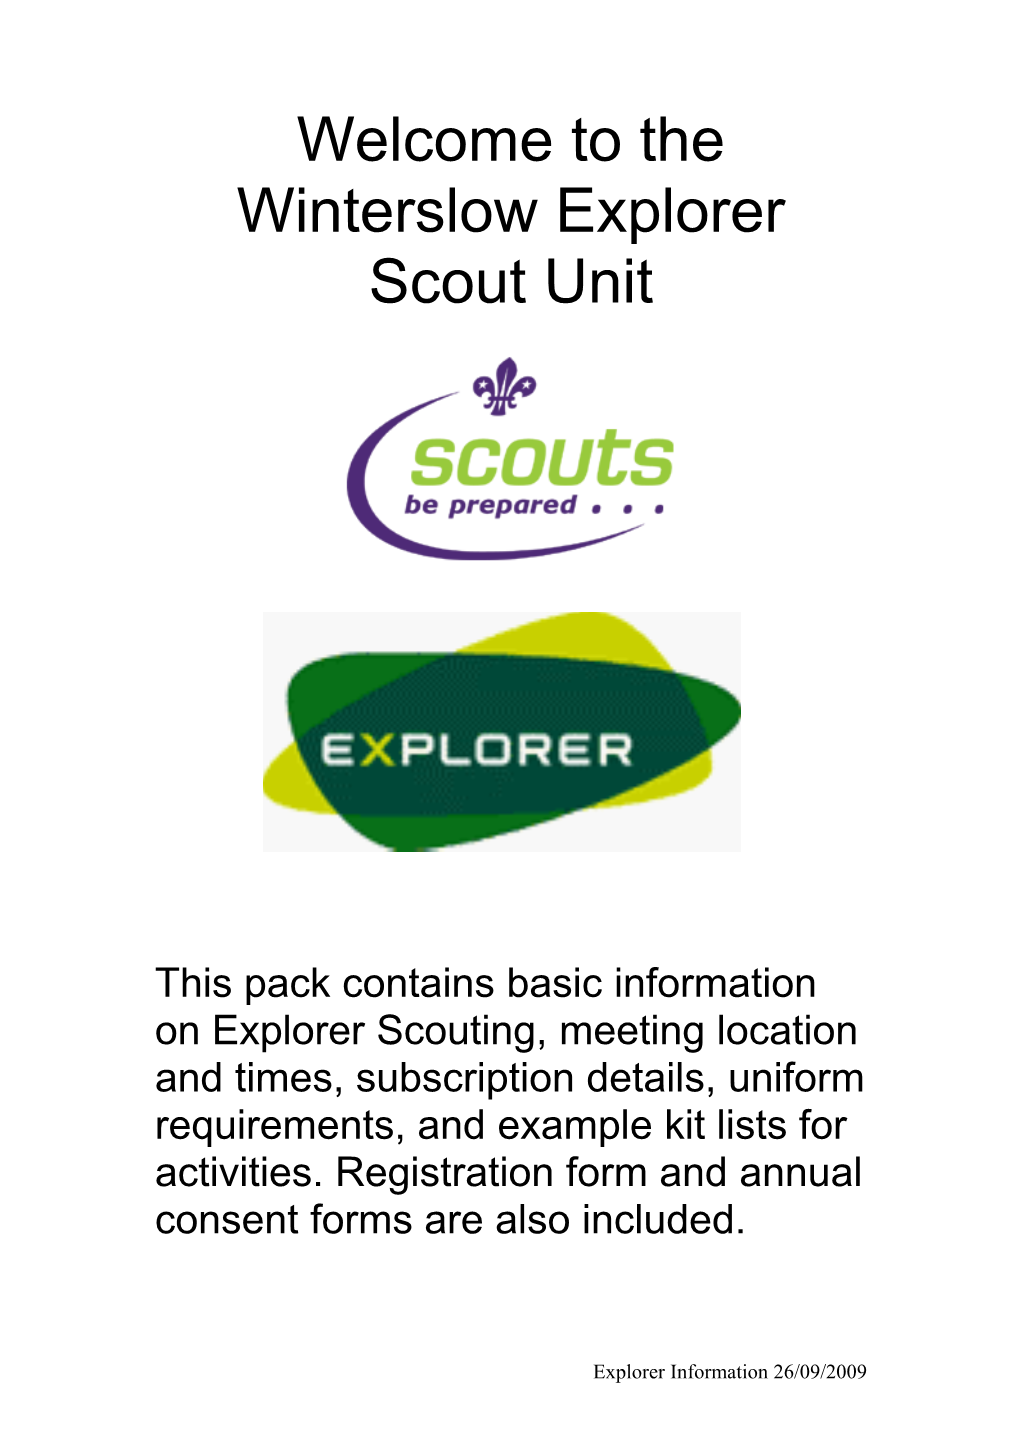 Welcome to the Winterslow Explorer Scout Unit